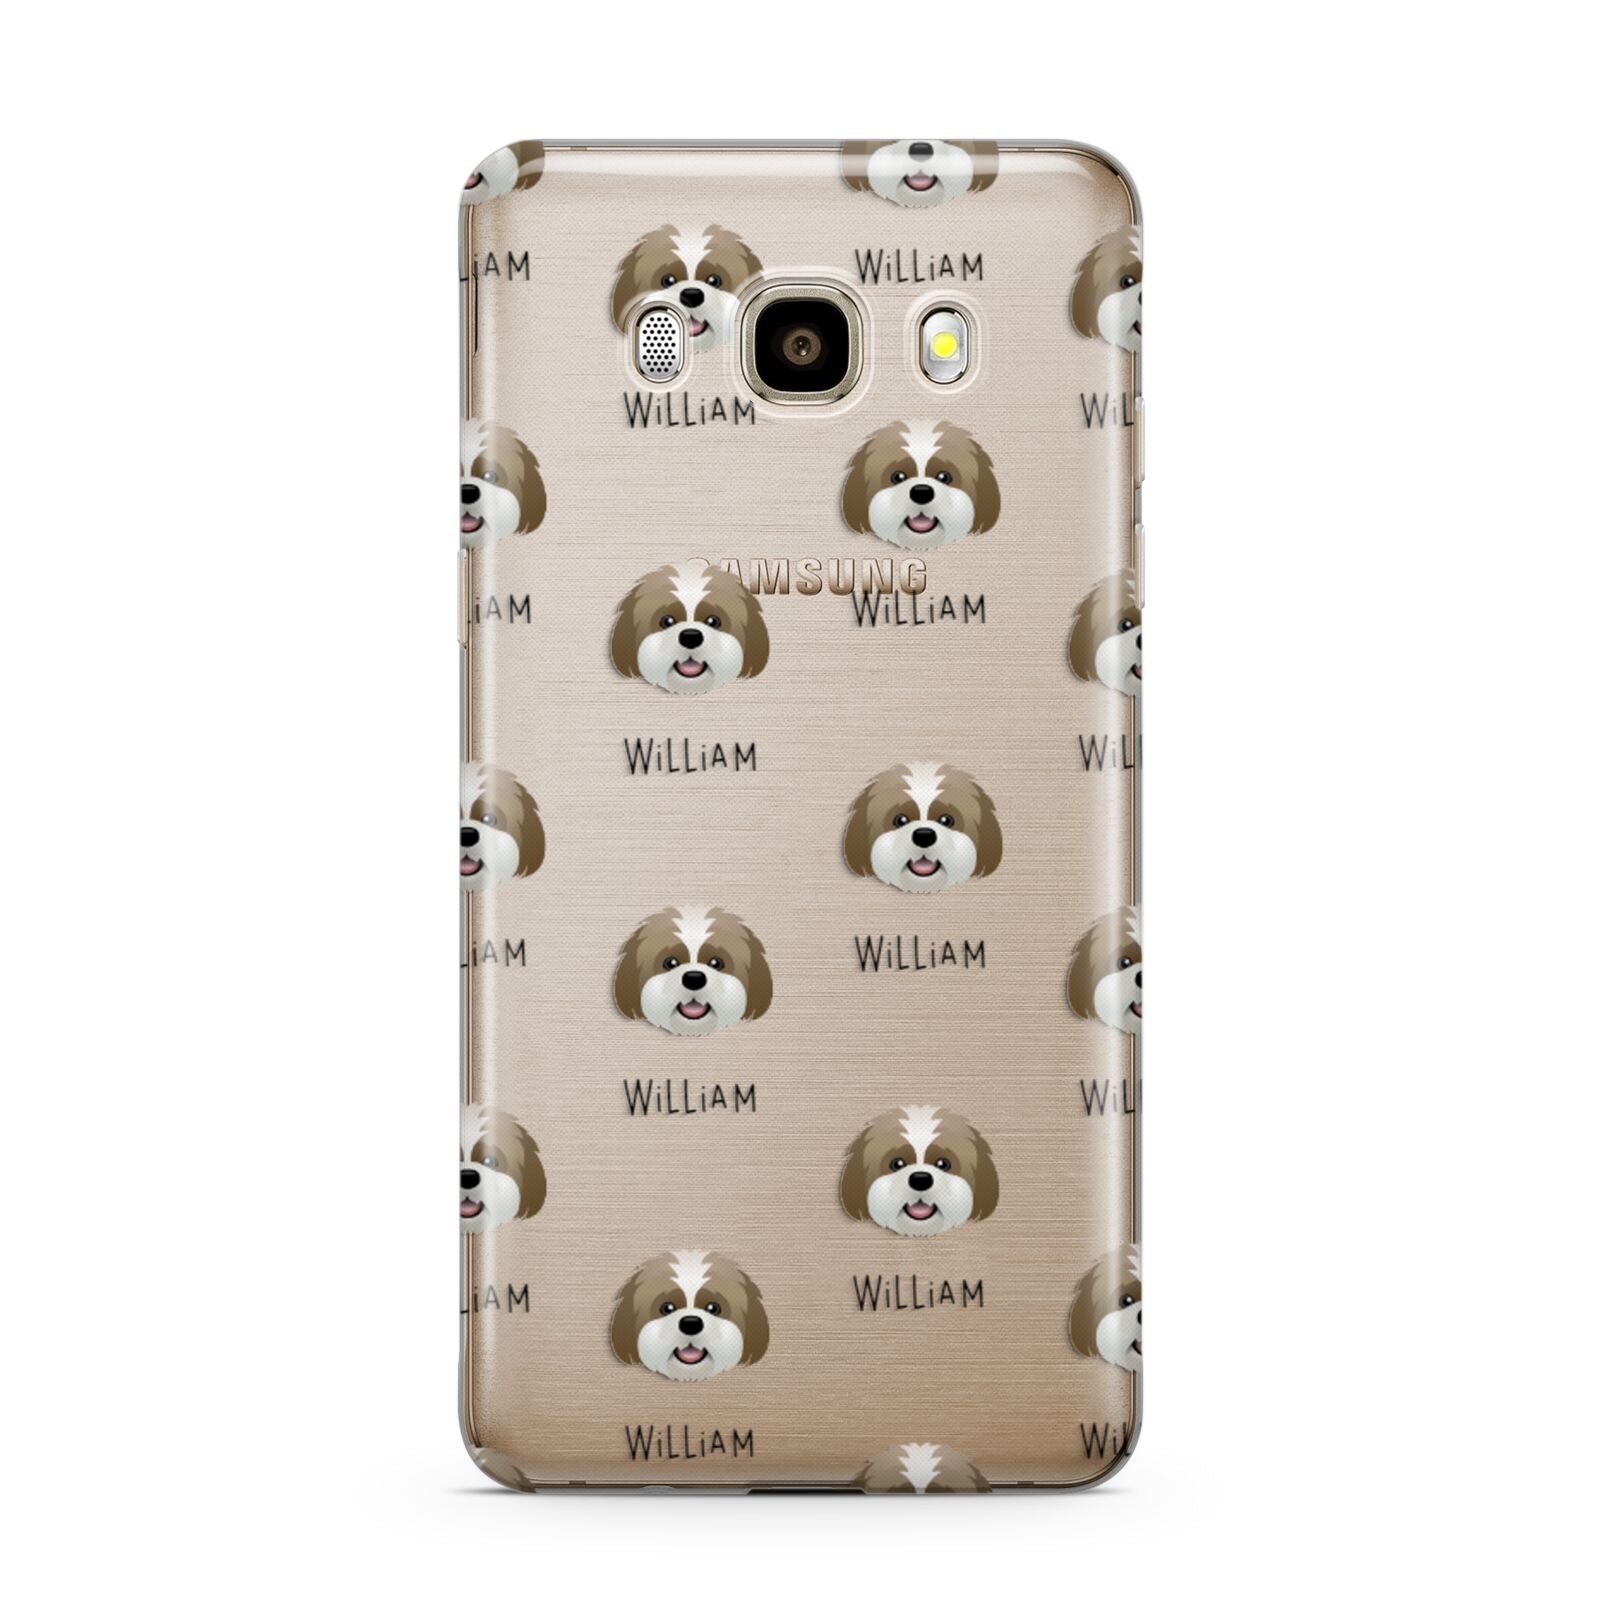 Lhatese Icon with Name Samsung Galaxy J7 2016 Case on gold phone